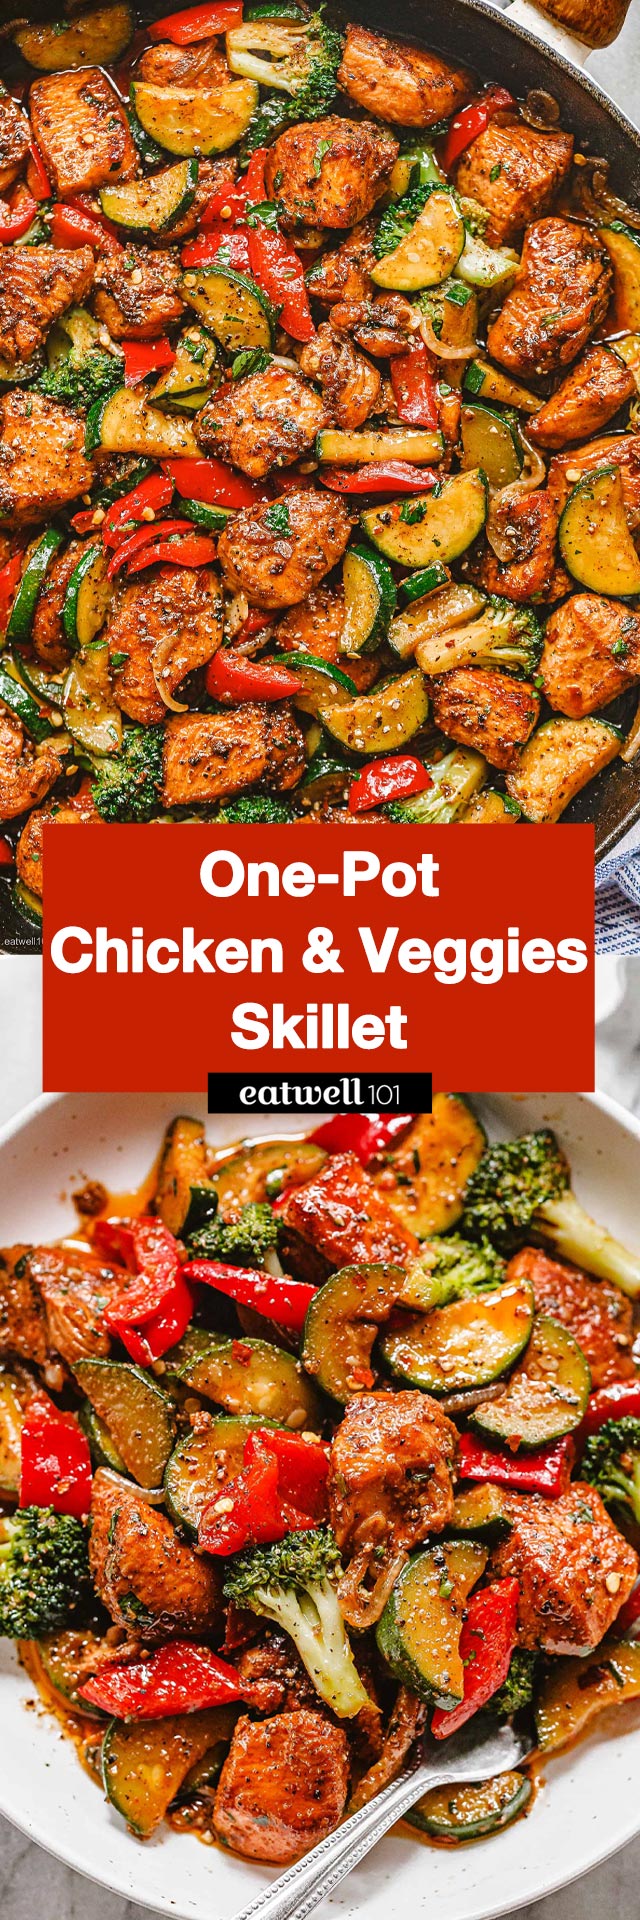 Healthy Chicken Recipe with Vegetable Skillet - #chicken #recipe #vegetables #eatwell101 - Our healthy chicken recipe with vegetables takes 20 minutes to make and will wow your family with its amazing flavor!